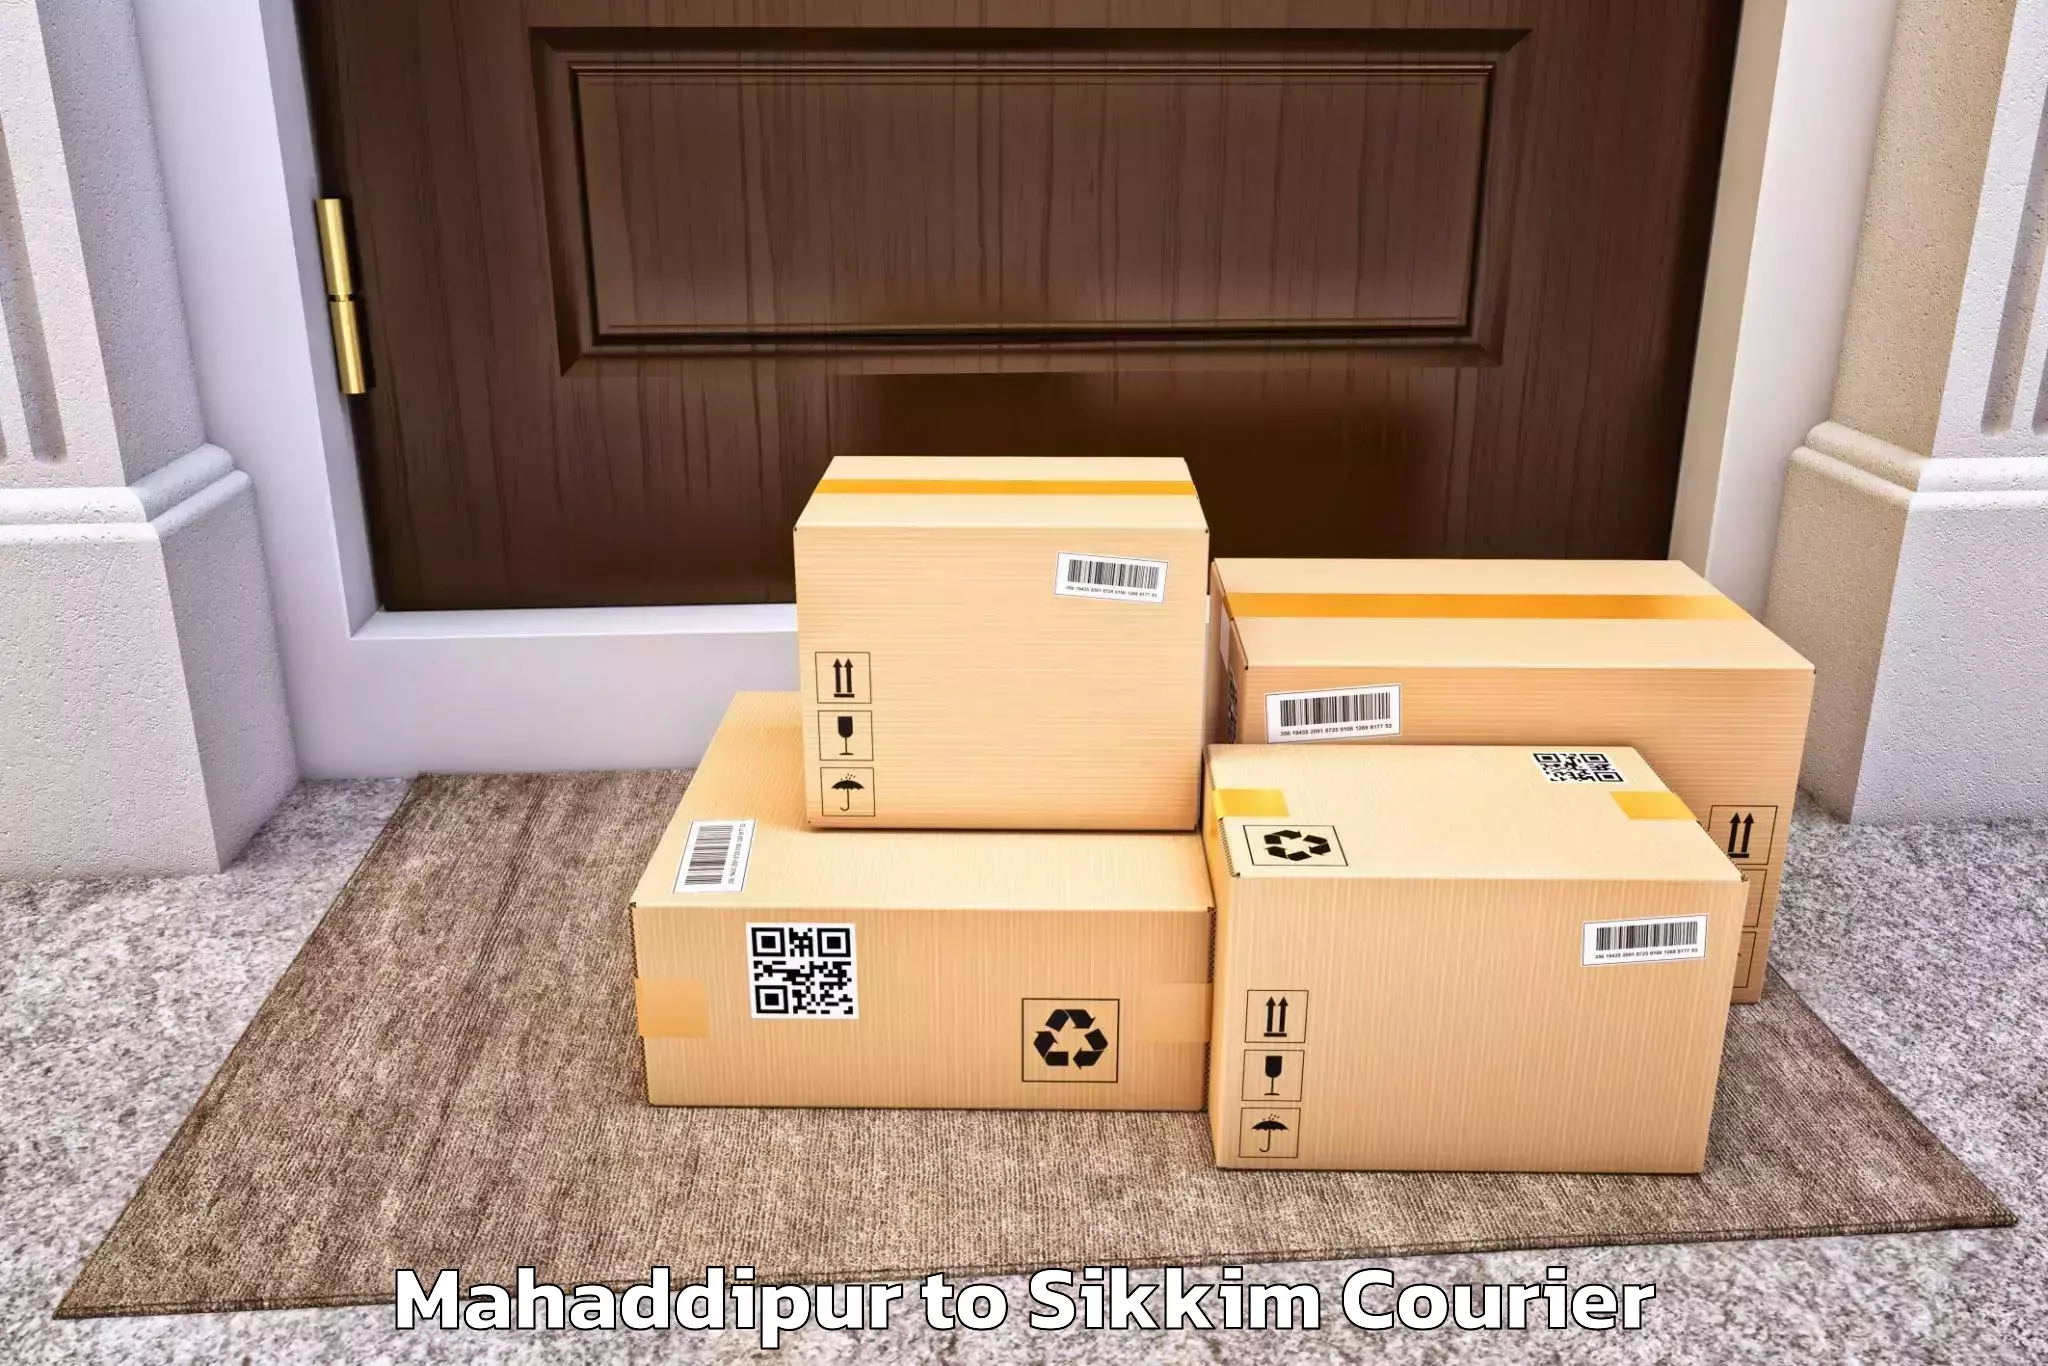 Expert furniture movers Mahaddipur to West Sikkim